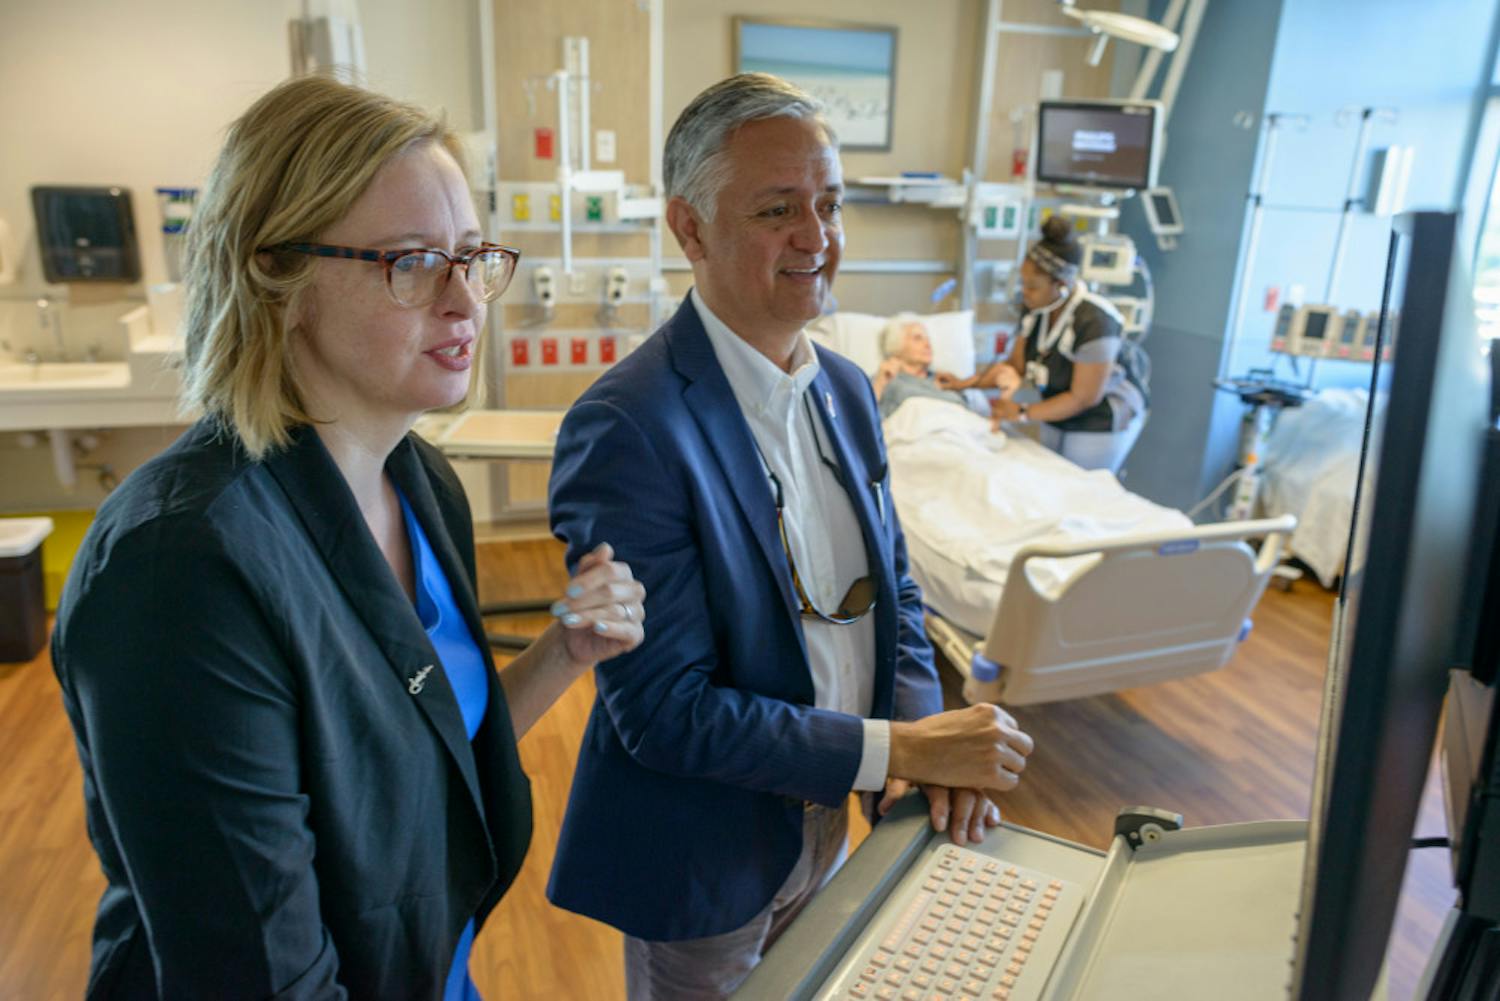 Ragnhildur Bjarnadottir, Ph.D., left, and Robert Lucero, Ph.D., plan to use nurses' notes for their project in improving the safety for hospitalized older adults.